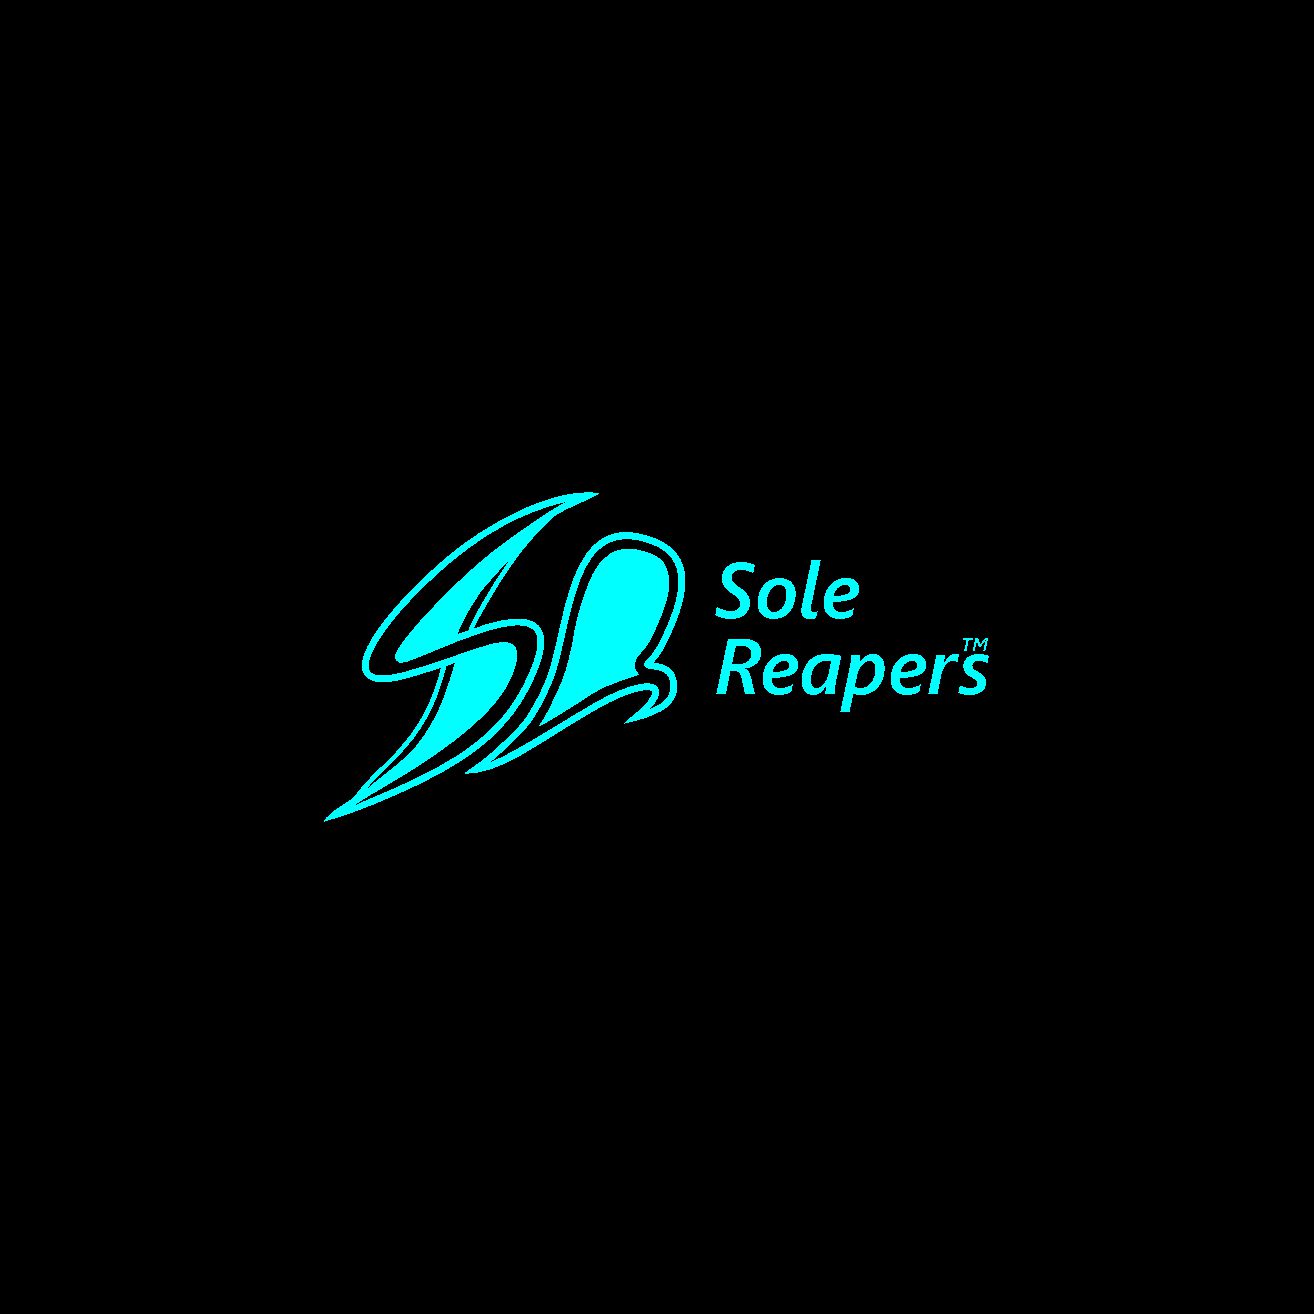 Sole Reapers provider